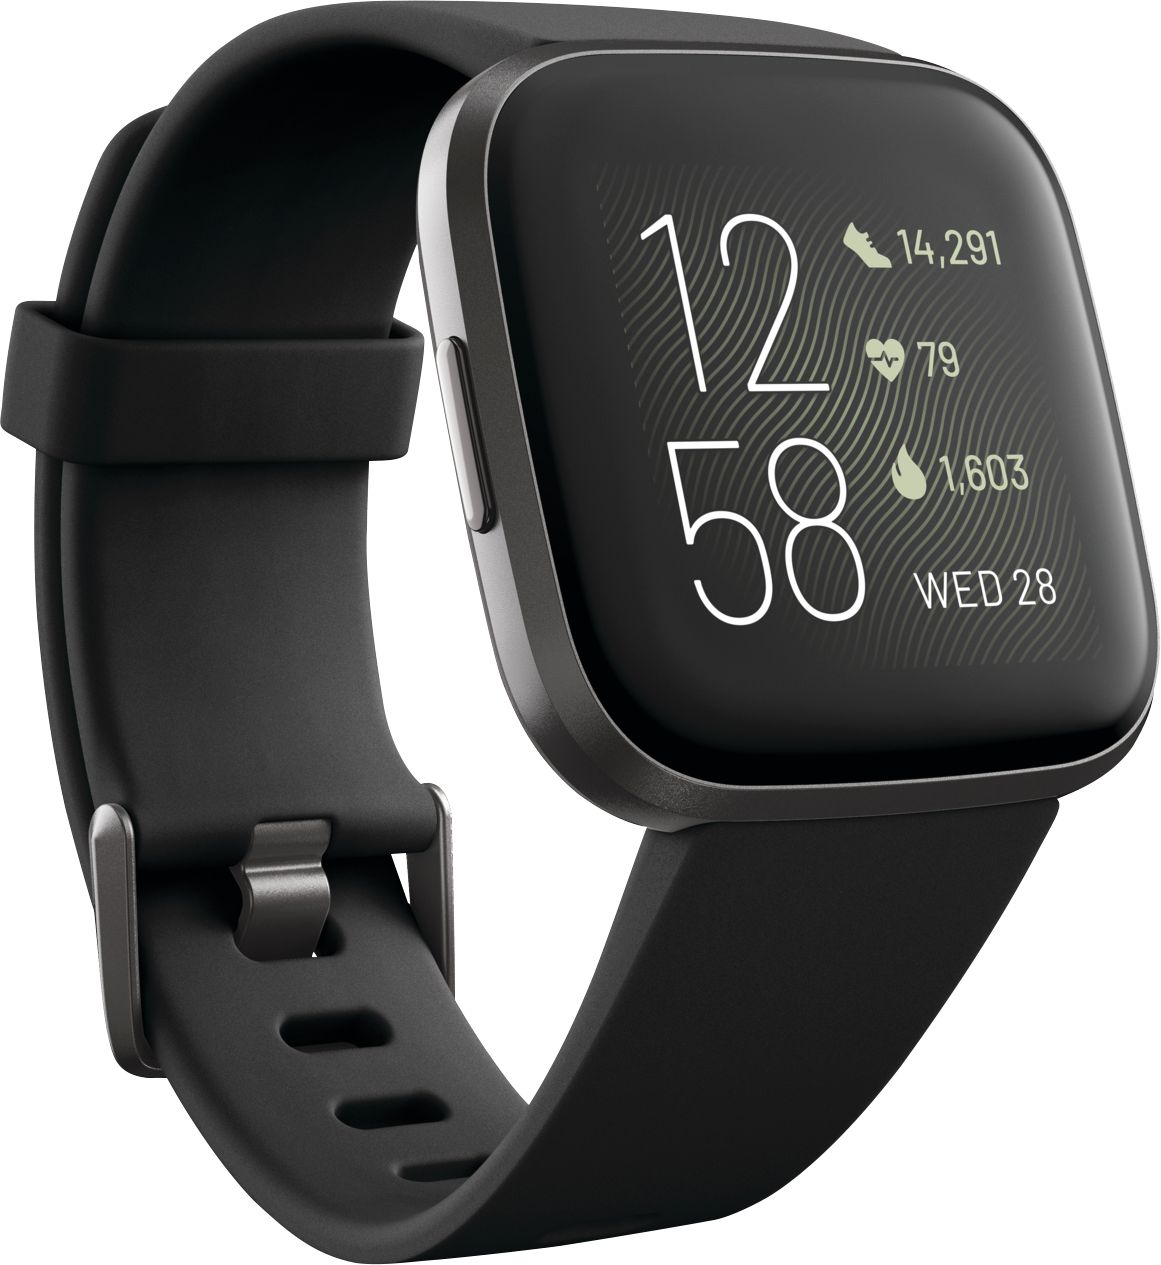 Questions and Answers: Fitbit Versa 2 Health & Fitness Smartwatch ...